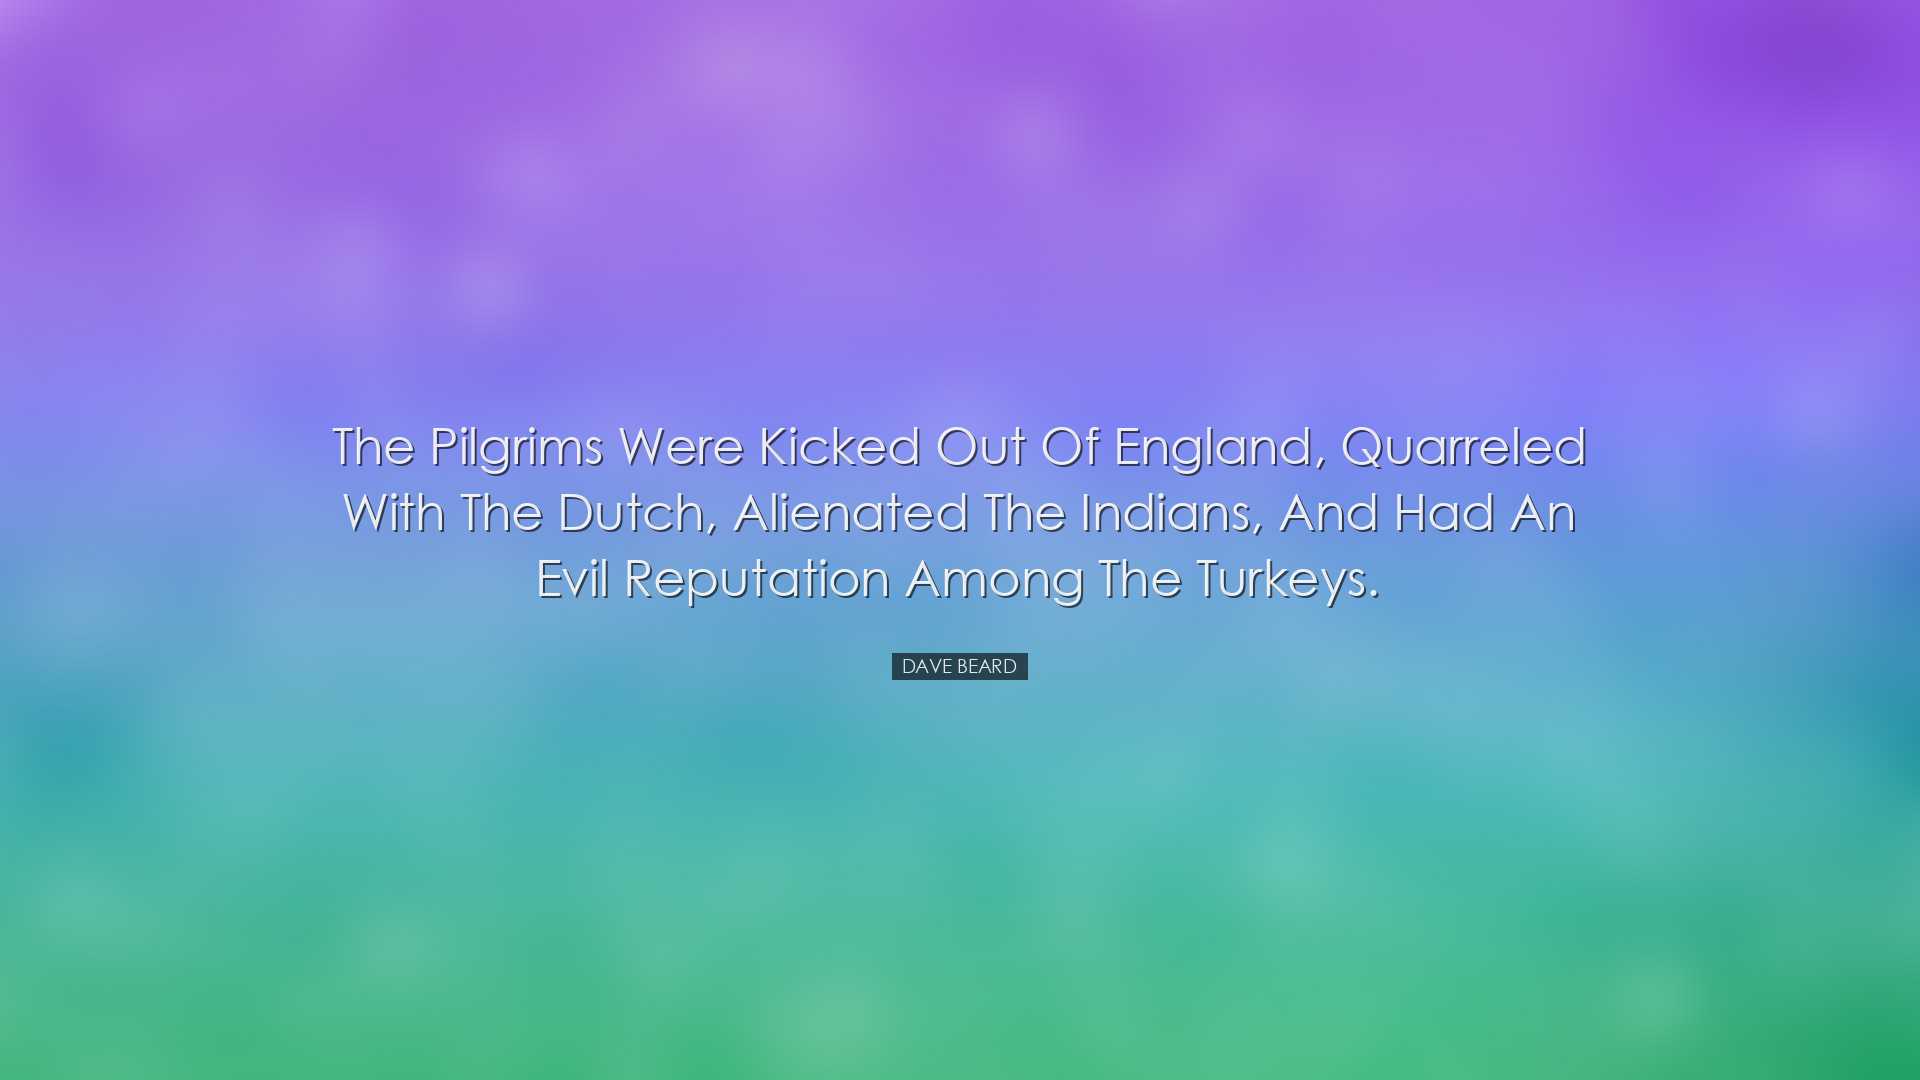 The pilgrims were kicked out of England, quarreled with the Dutch,